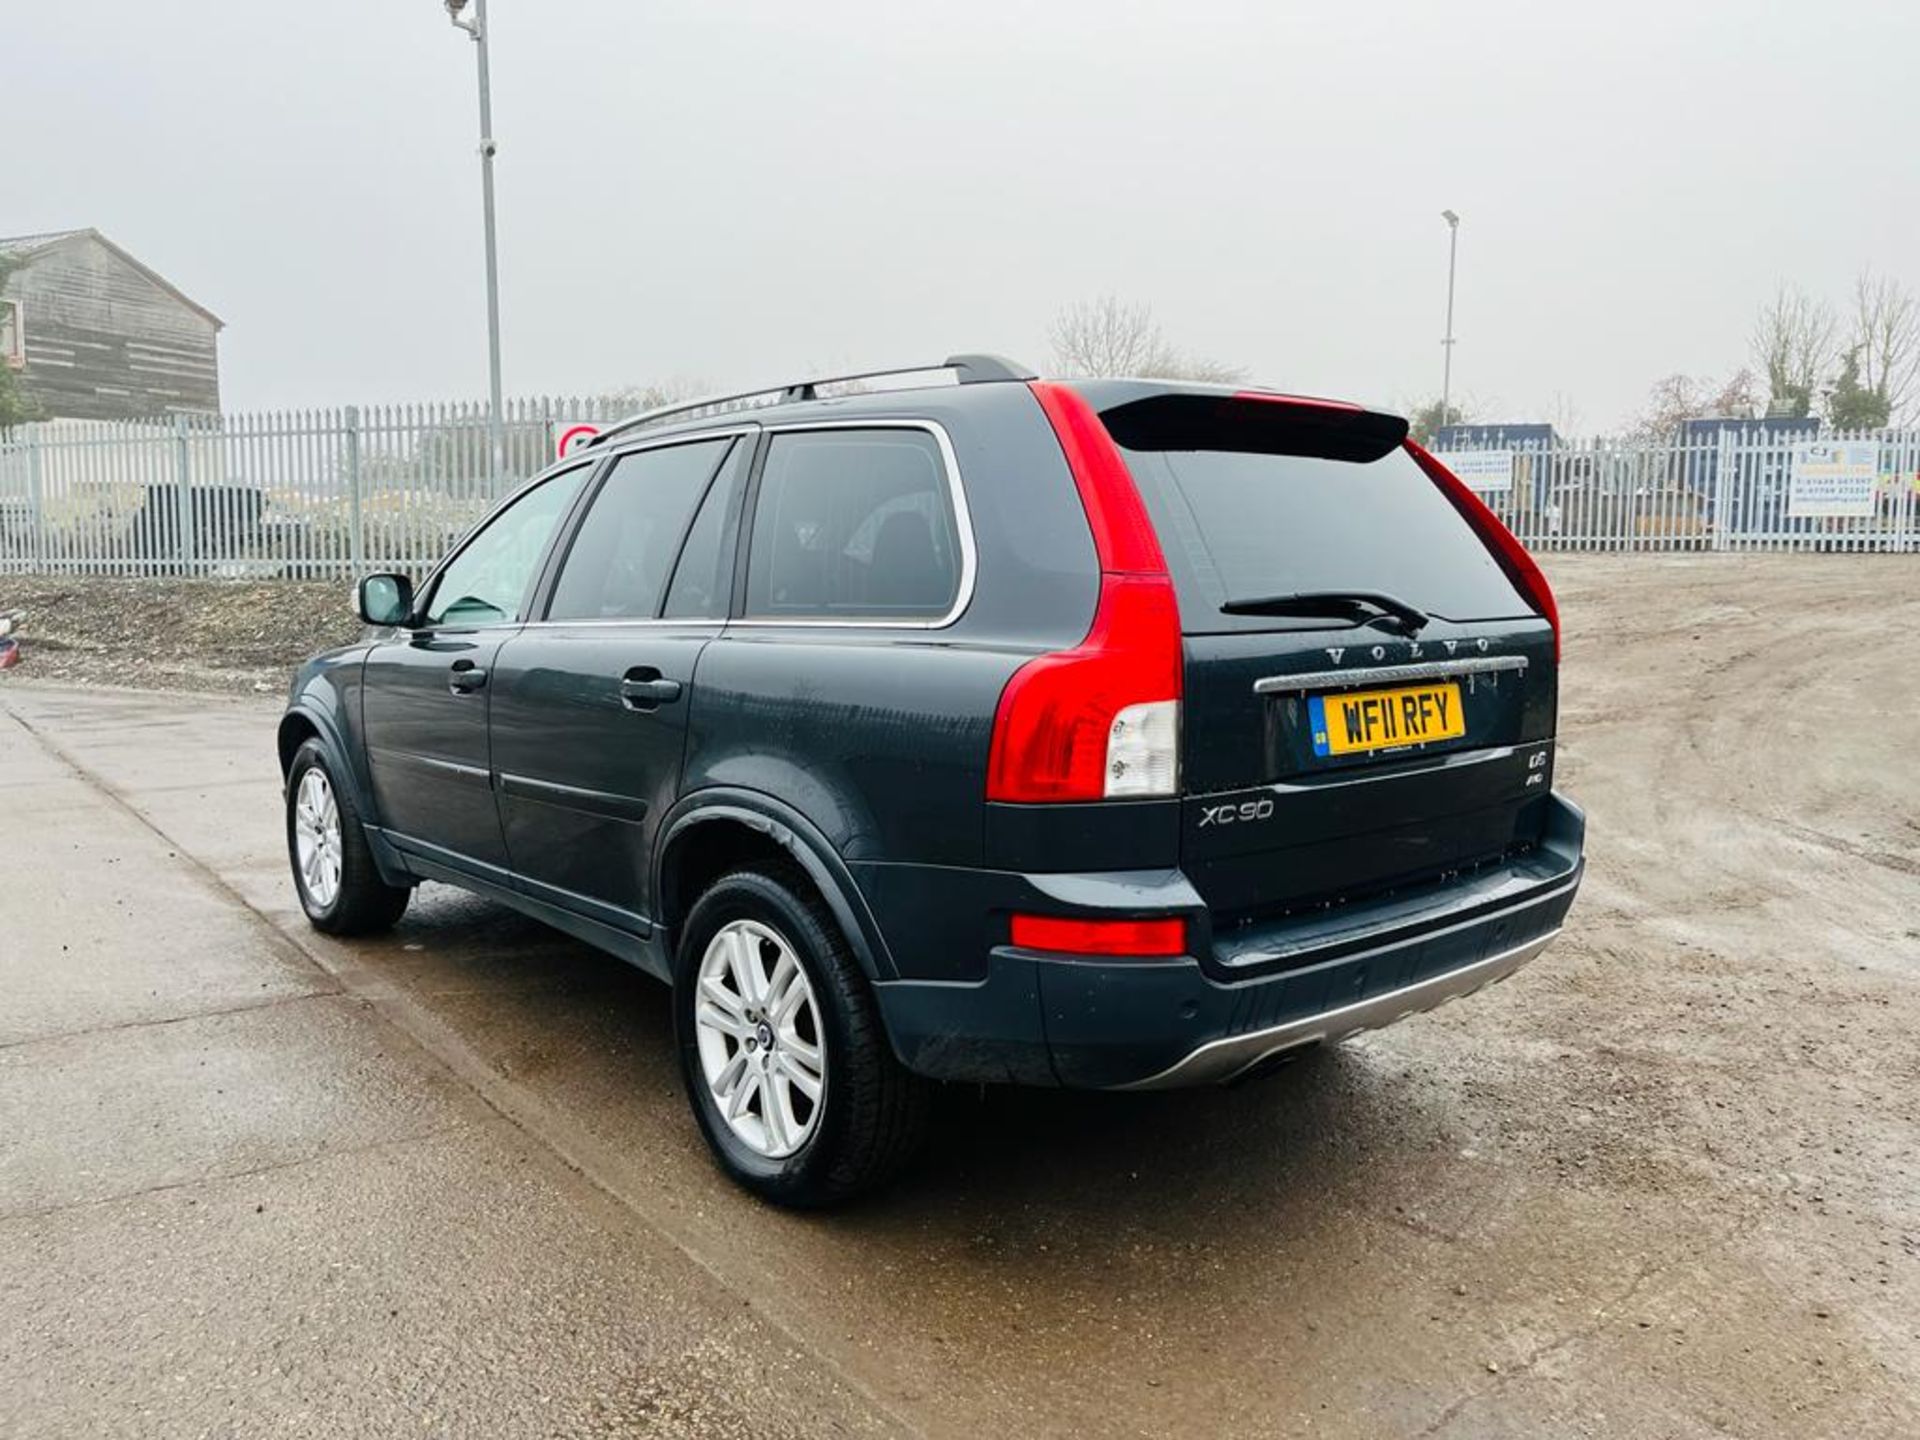 Volvo XC90 2.4 D5 200 SE G/T 4WD 2011 '11 Reg' A/C - No Vat - Ony 121,773 Miles - Image 5 of 35